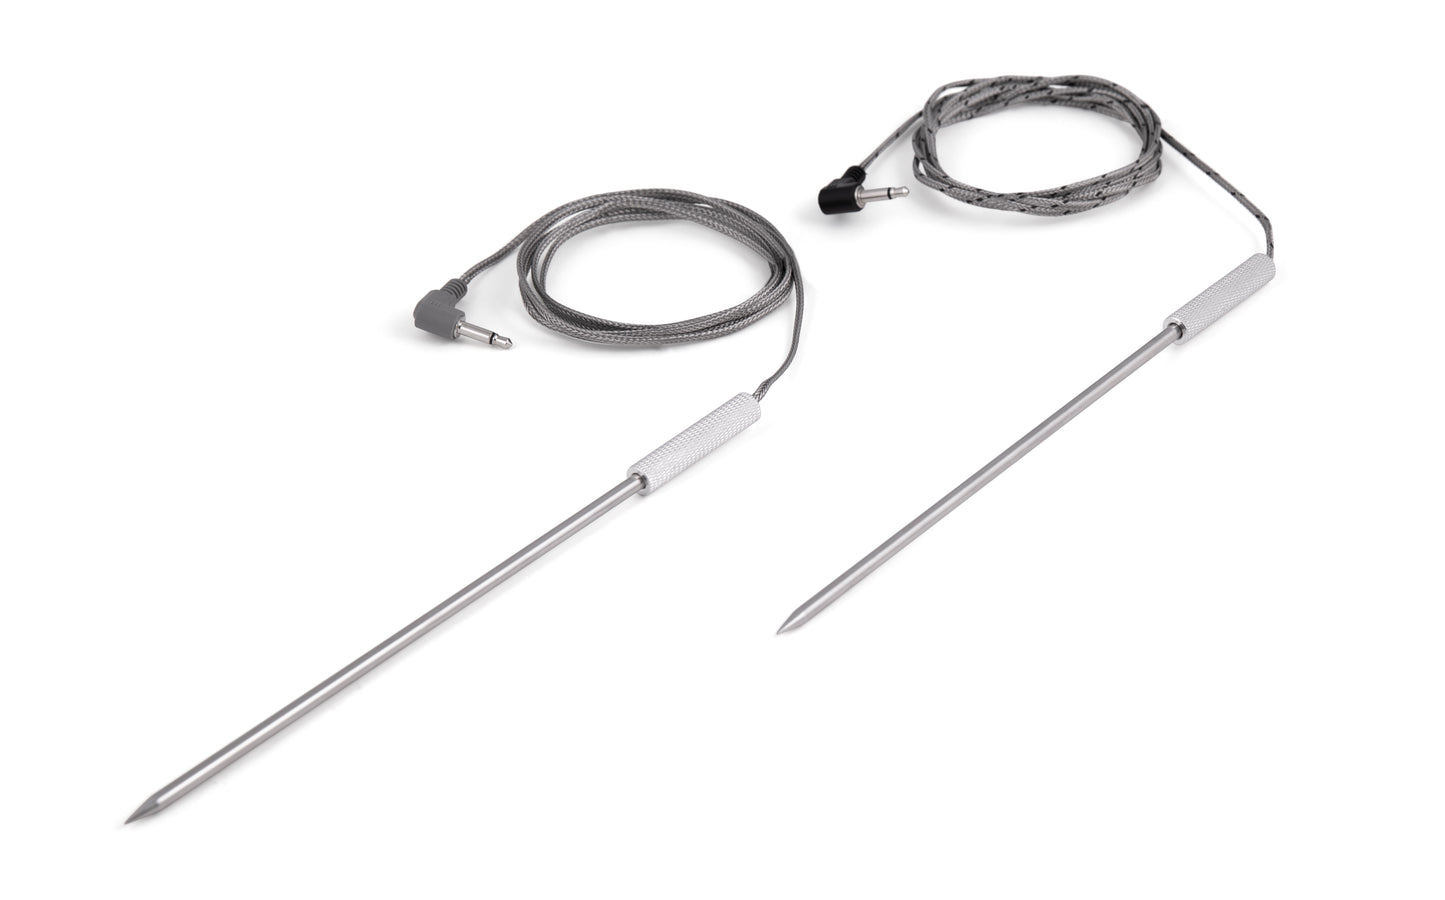 Broil King Replacement Probes